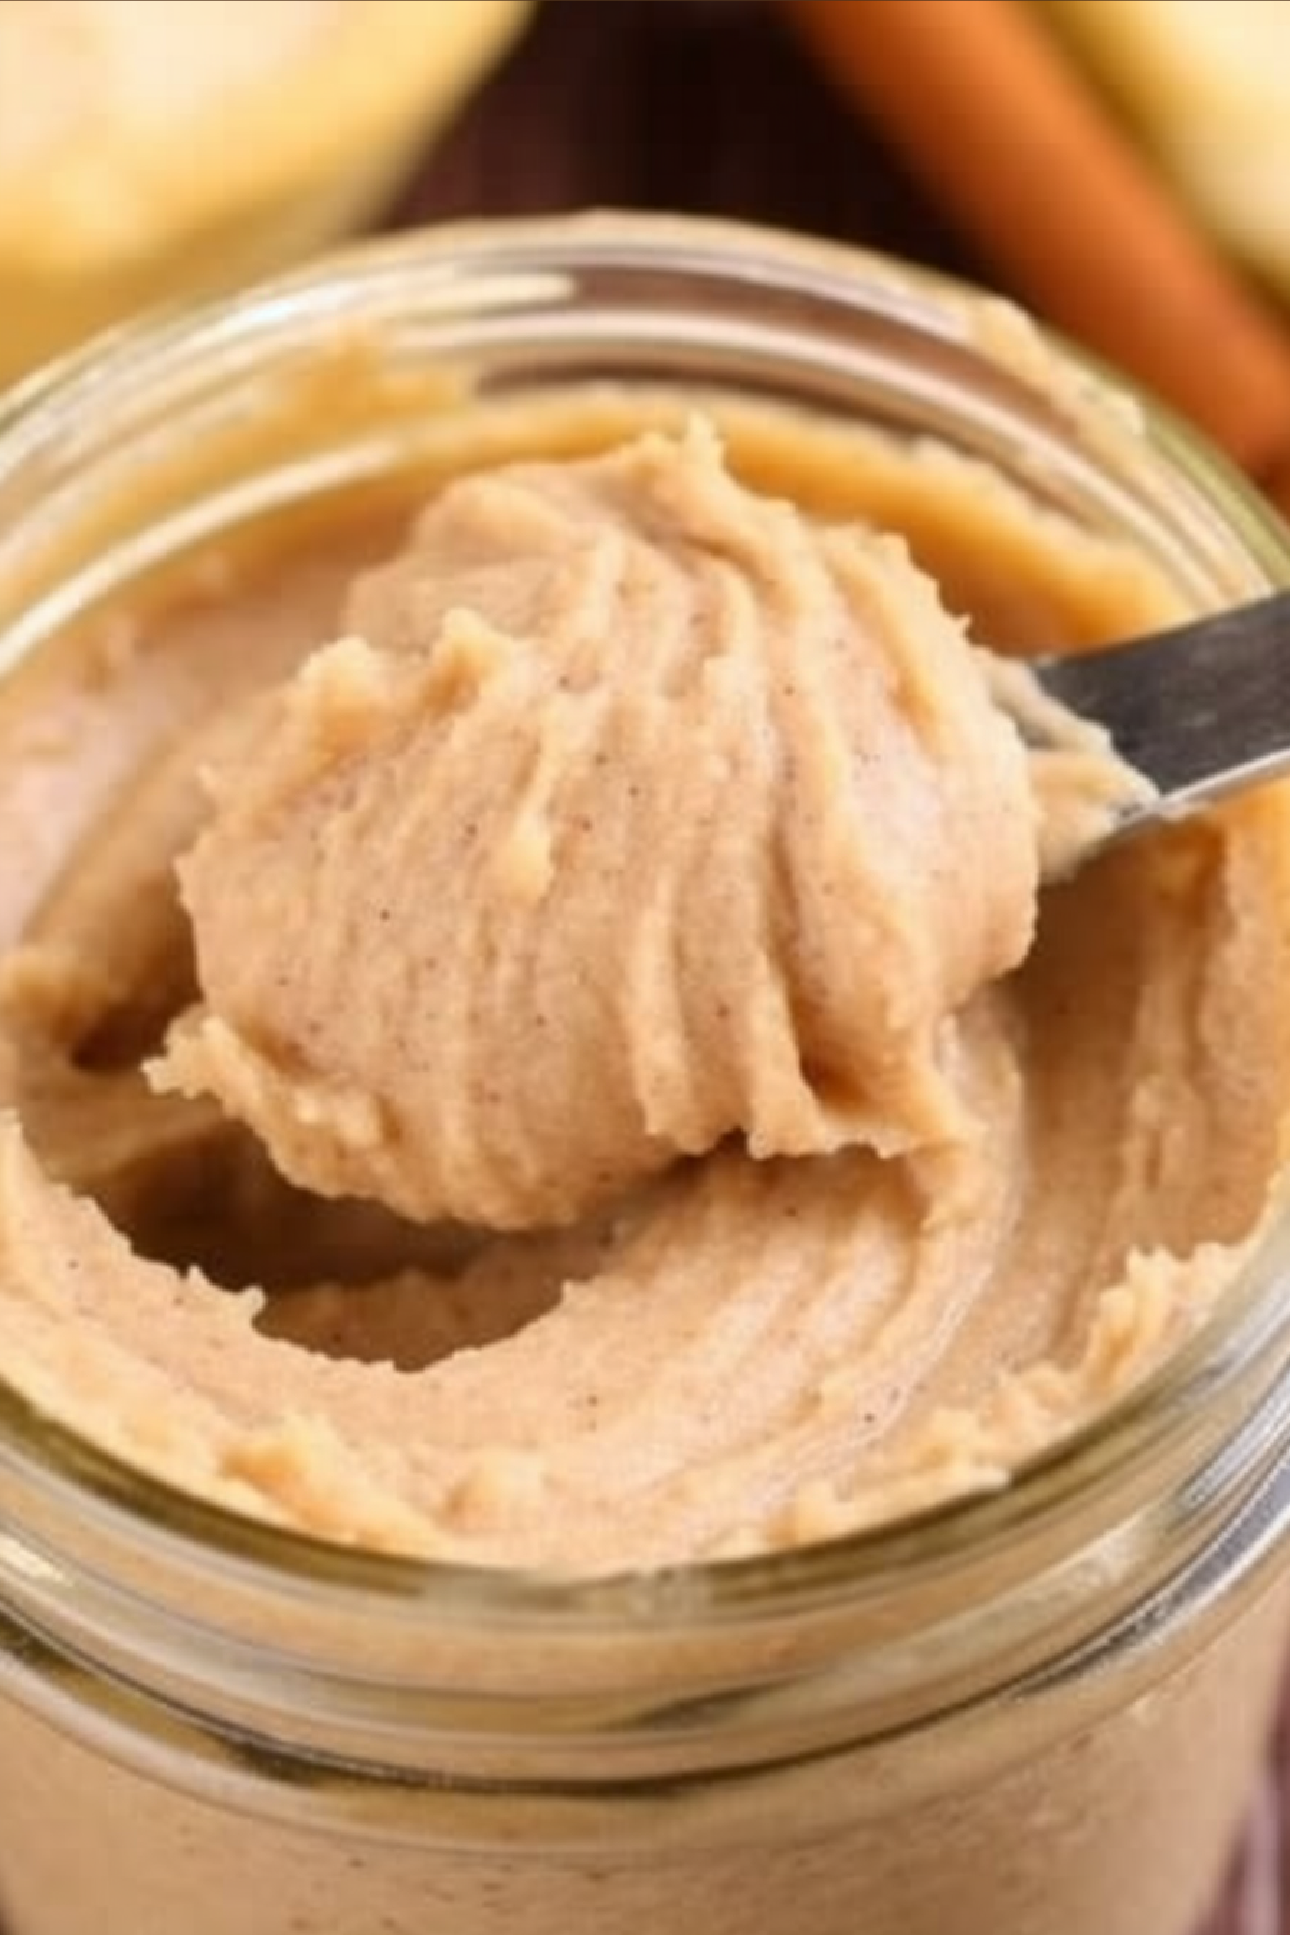 Love this Texas Roadhouse Cinnamon Honey Butter recipe? Pin it to your favorite Recipe Board